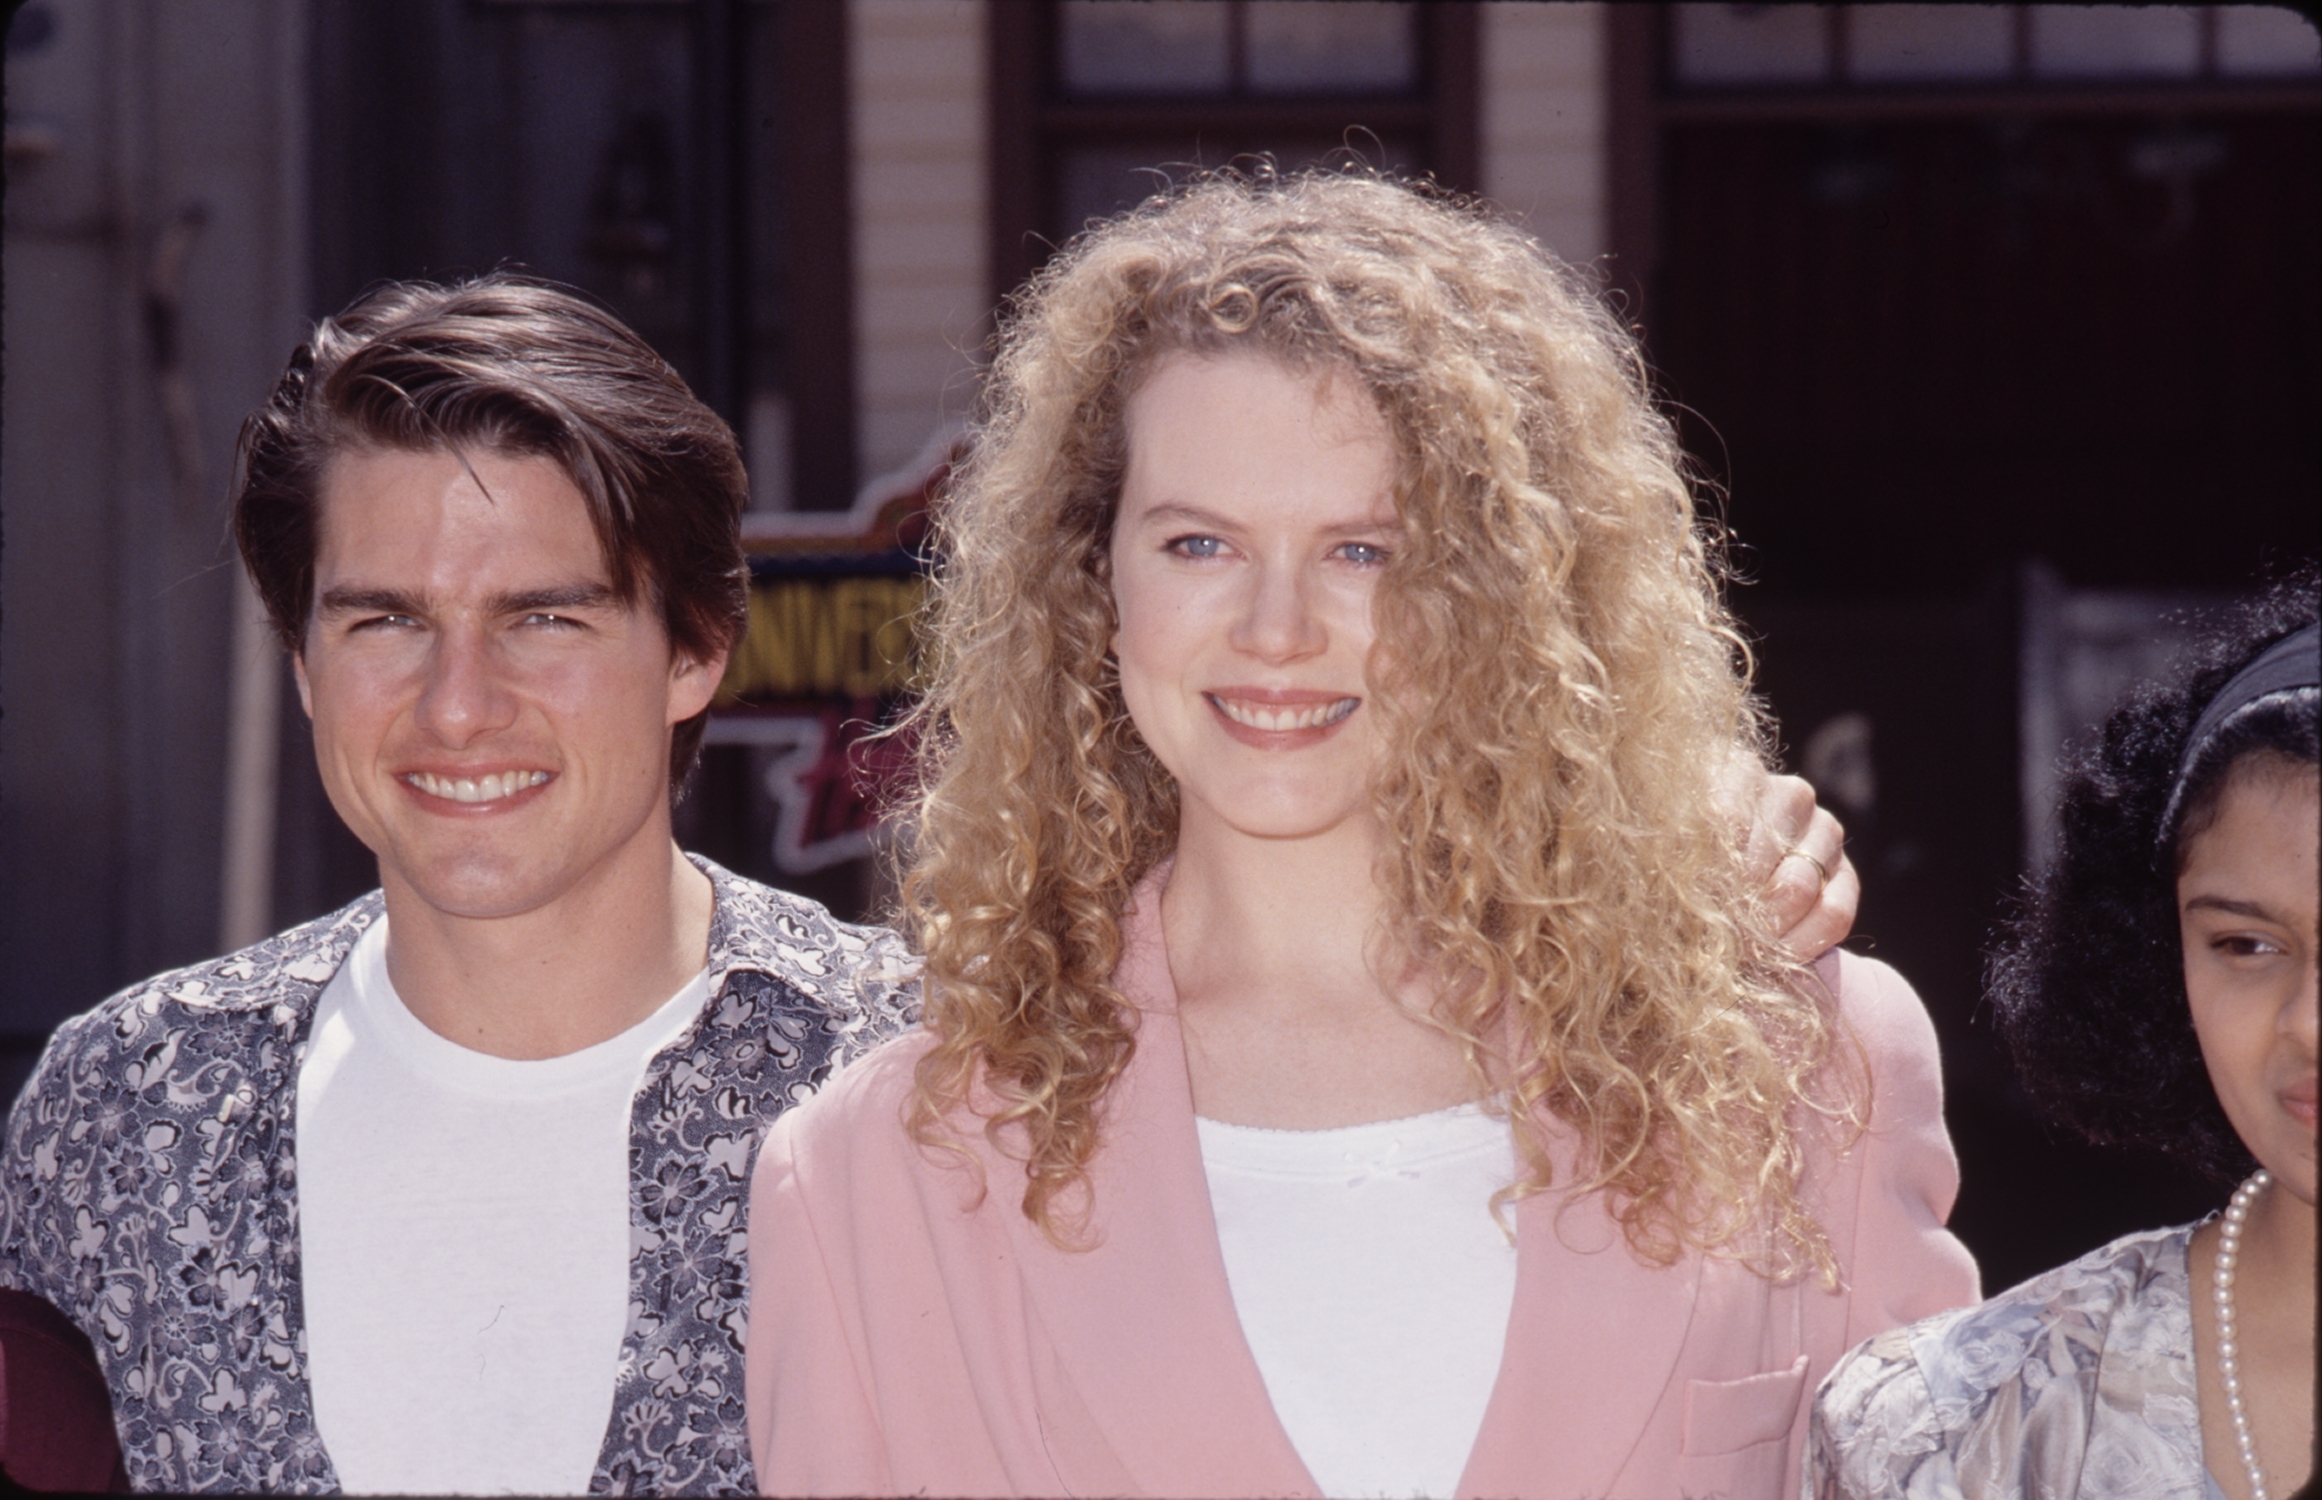 Tom Cruise and Nicole Kidman in 1995 in Unites States. | Source: Getty Images